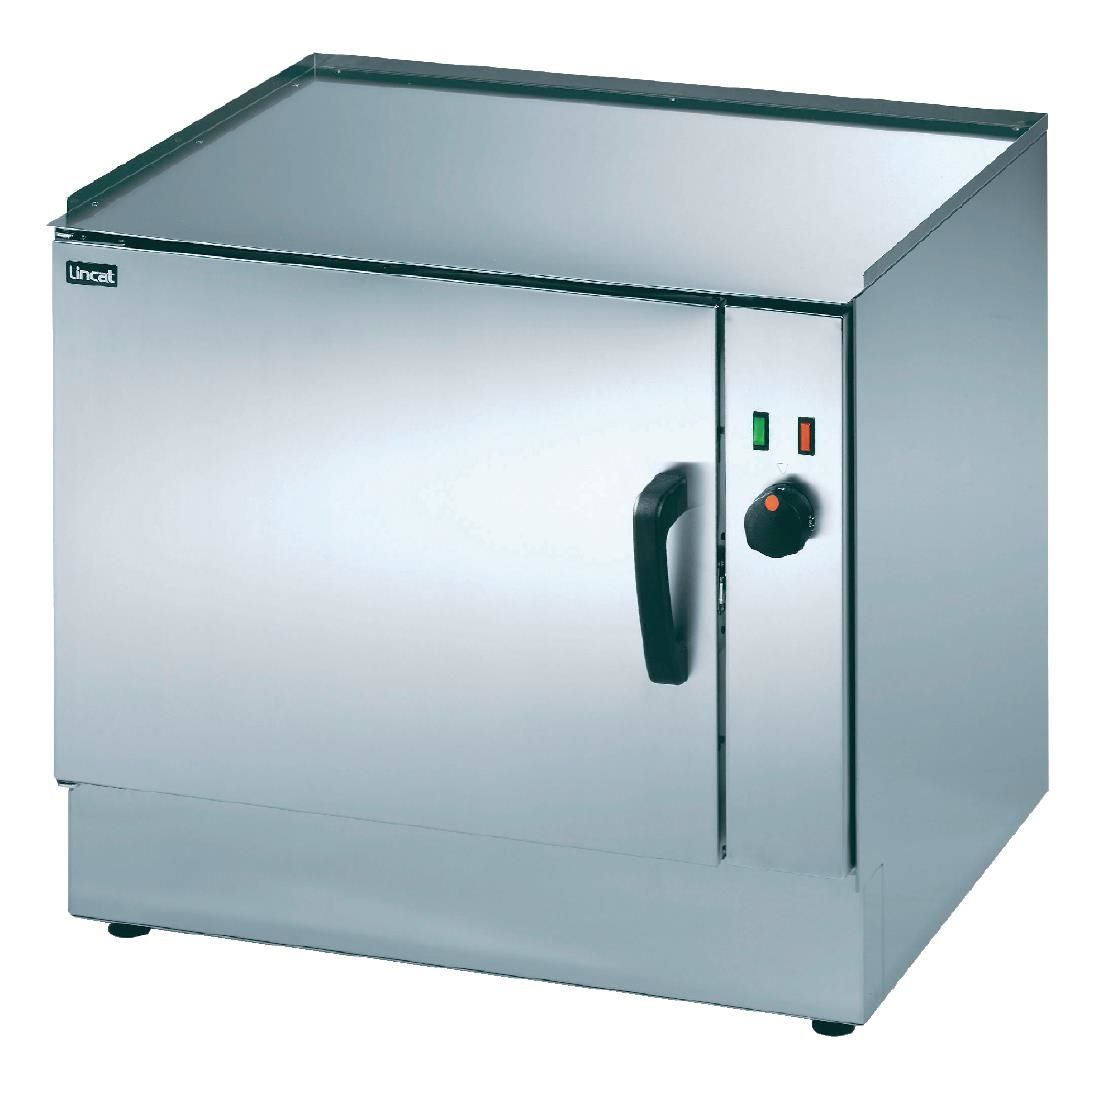 V7 - Lincat Silverlink 600 Electric Free-standing Oven - Larger size - W 750 mm - 3.0 kW E559